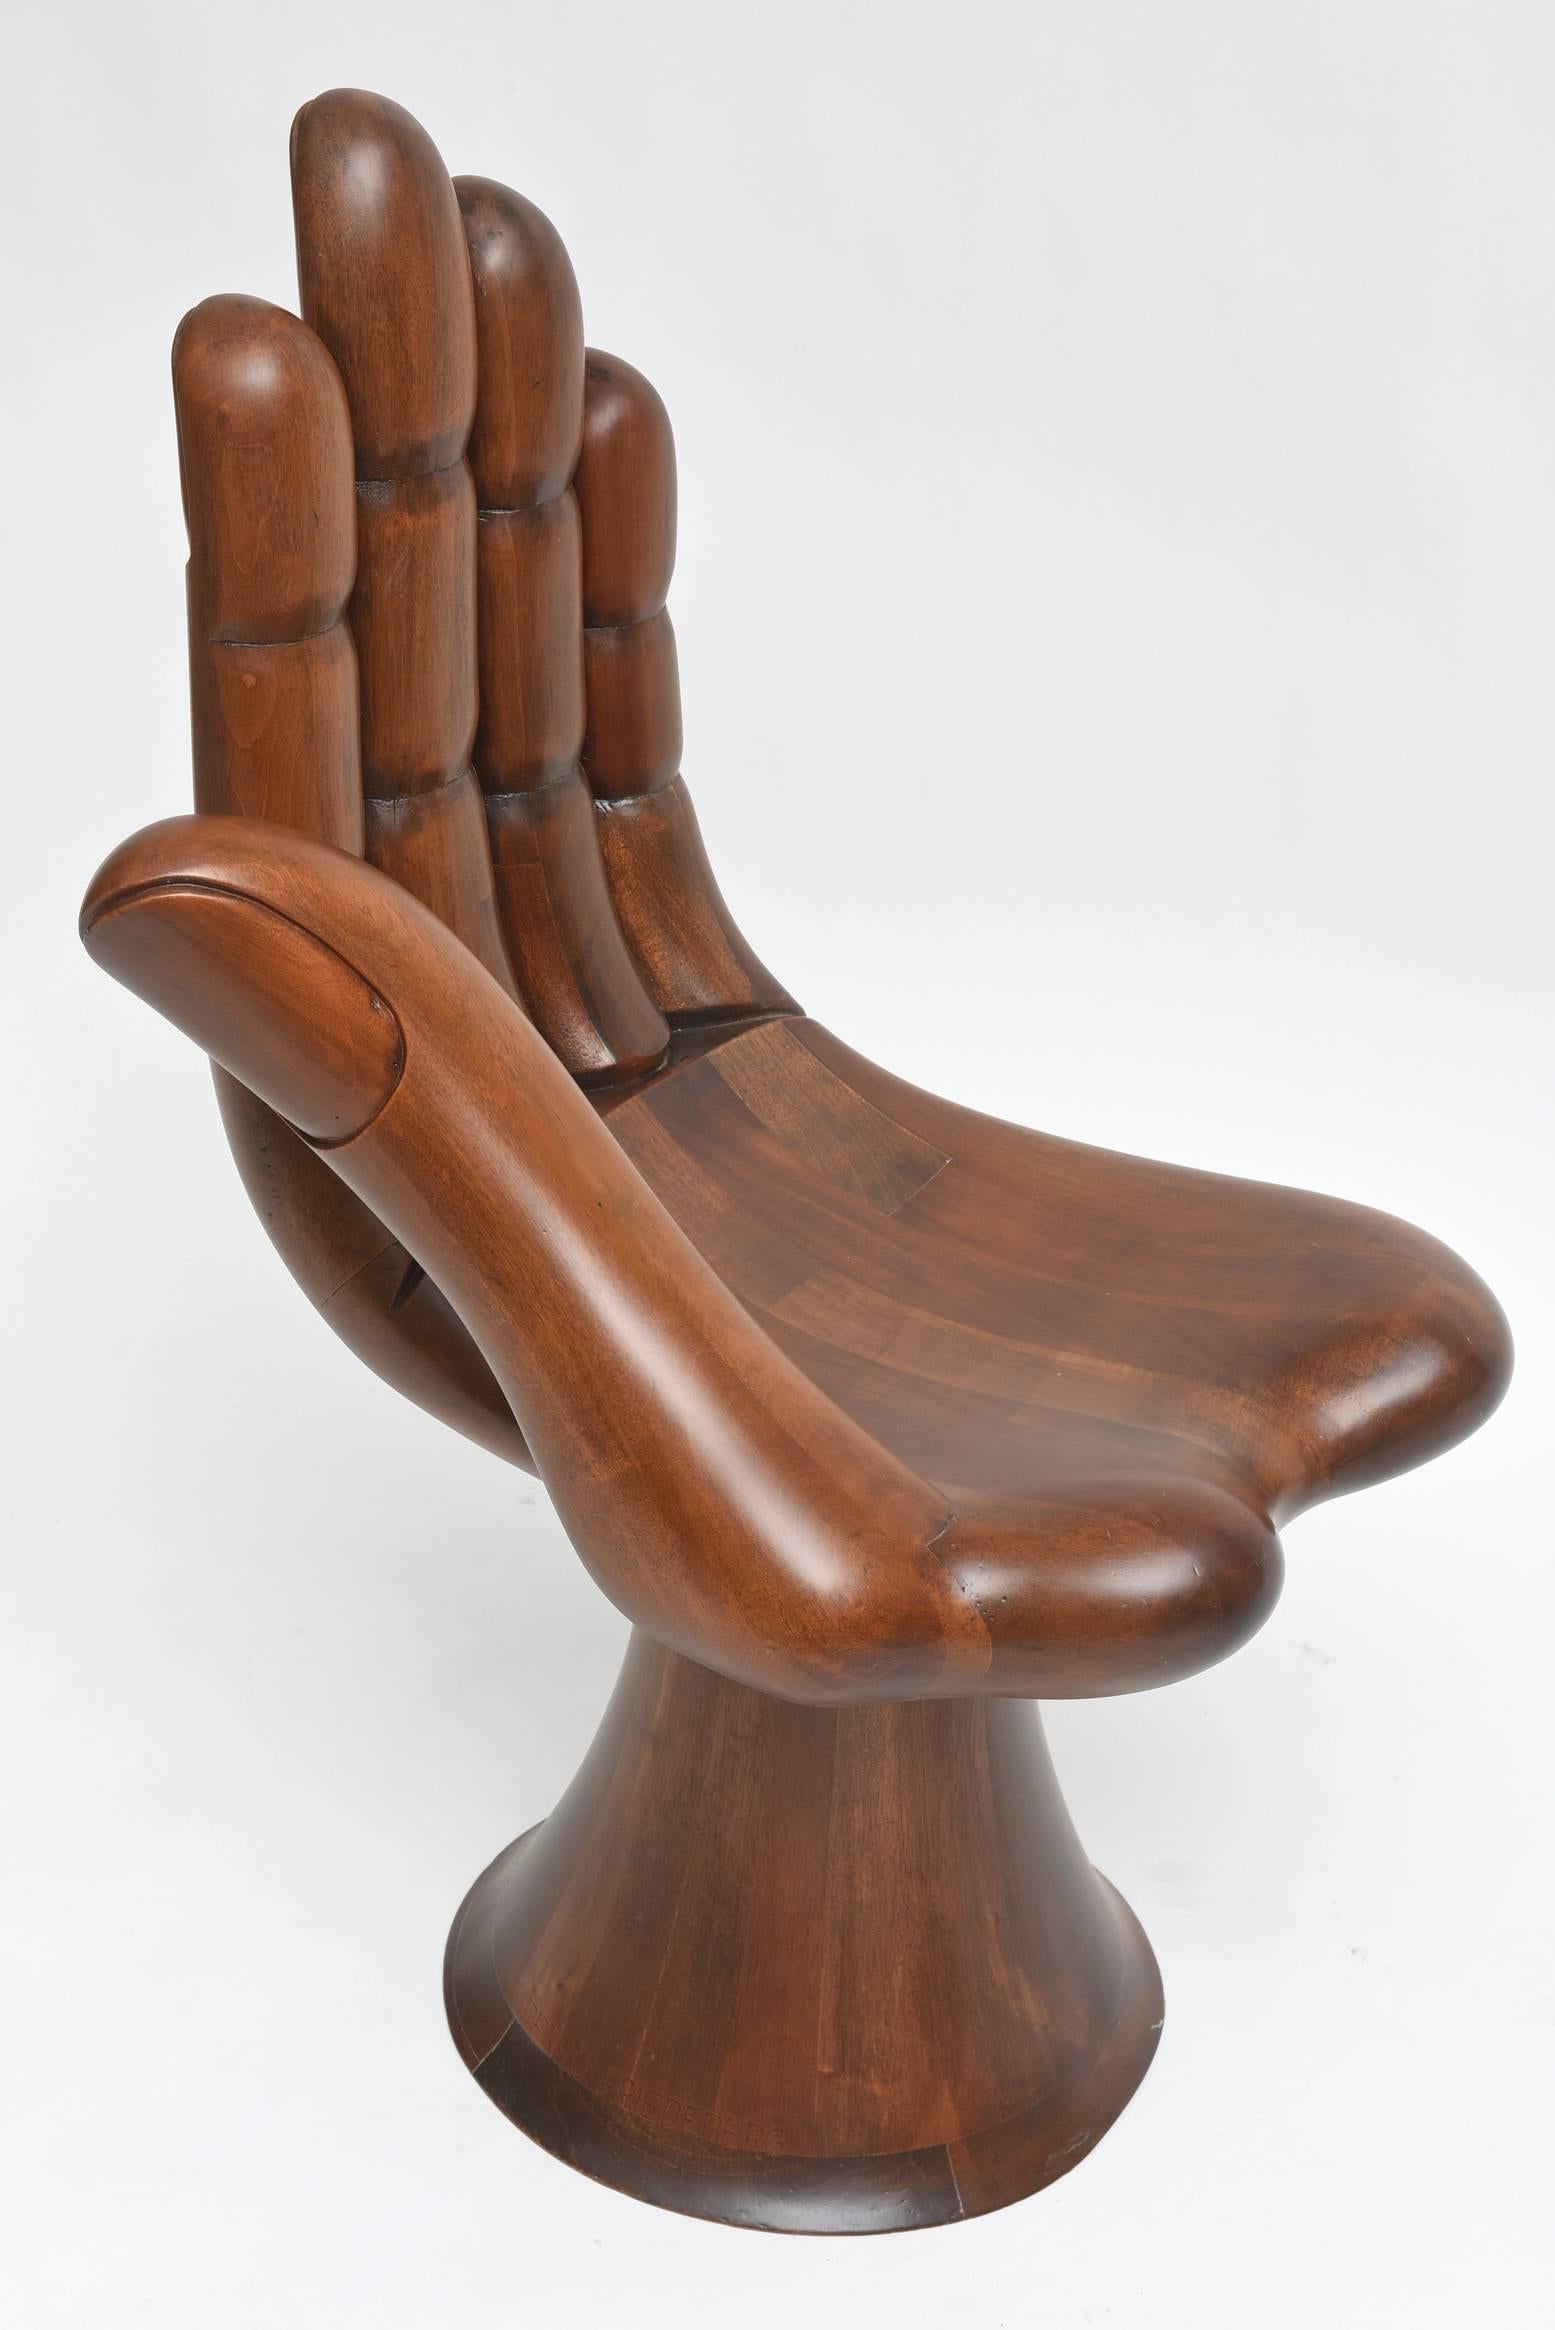 Iconic hand chair by Pedro Friedeberg.
Carved mahogany.